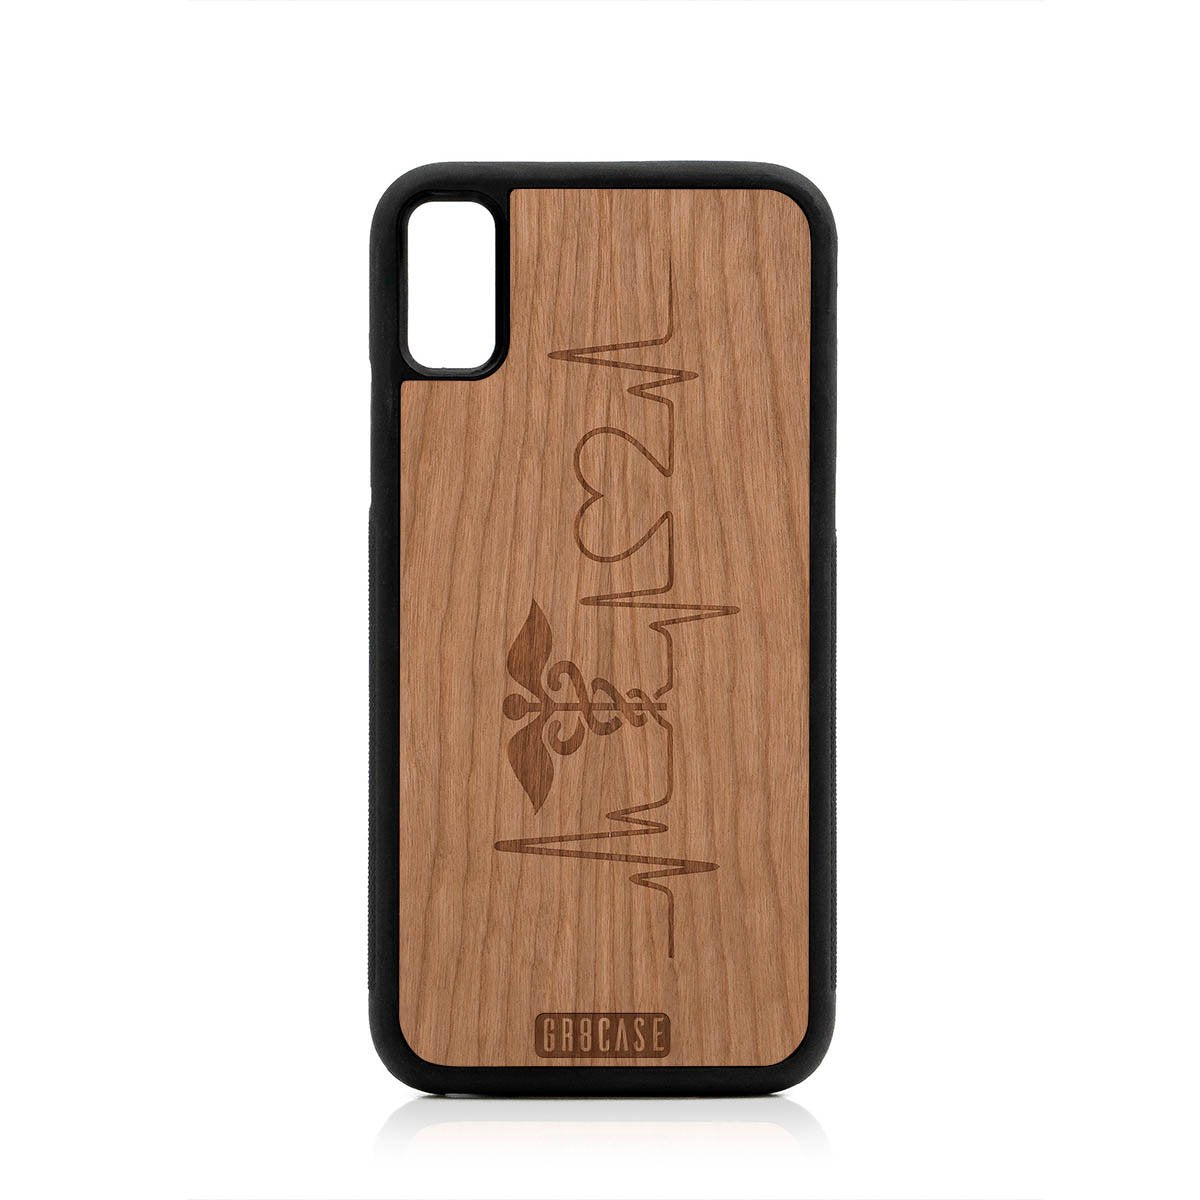 Hero's Heart (Nurse, Doctor) Design Wood Case For iPhone XS Max by GR8CASE